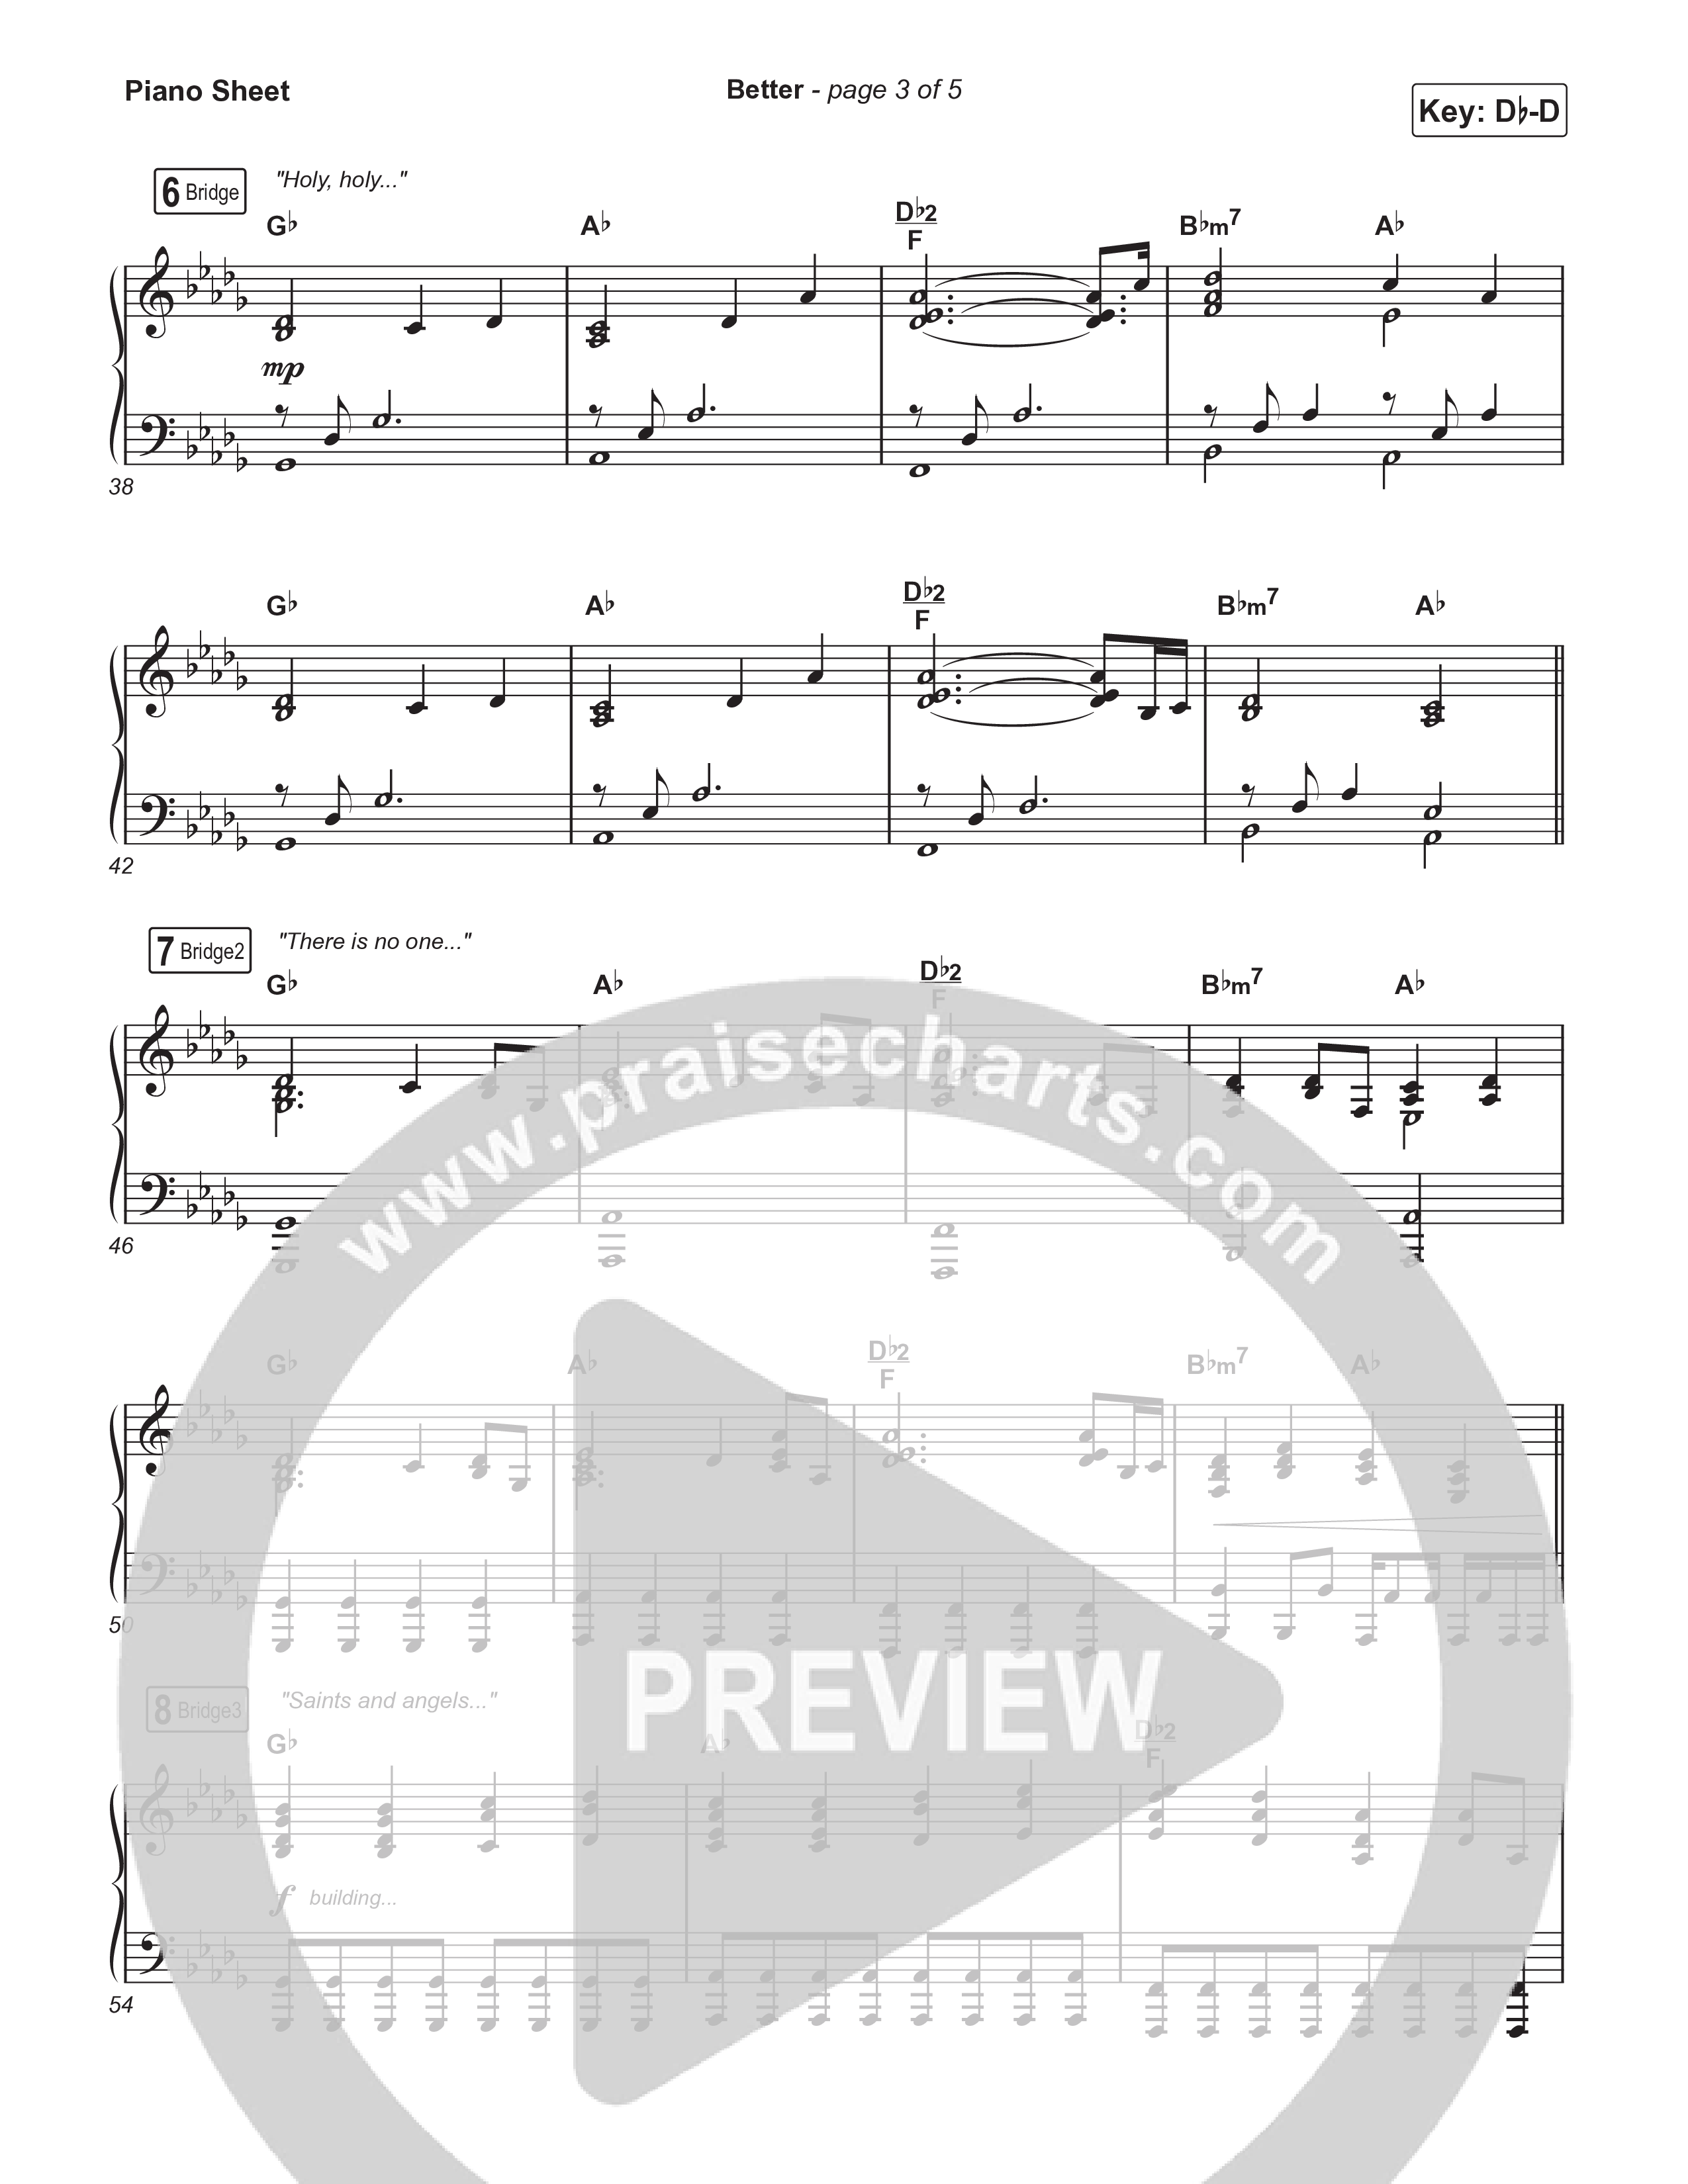 Better Piano Sheet (Charity Gayle)